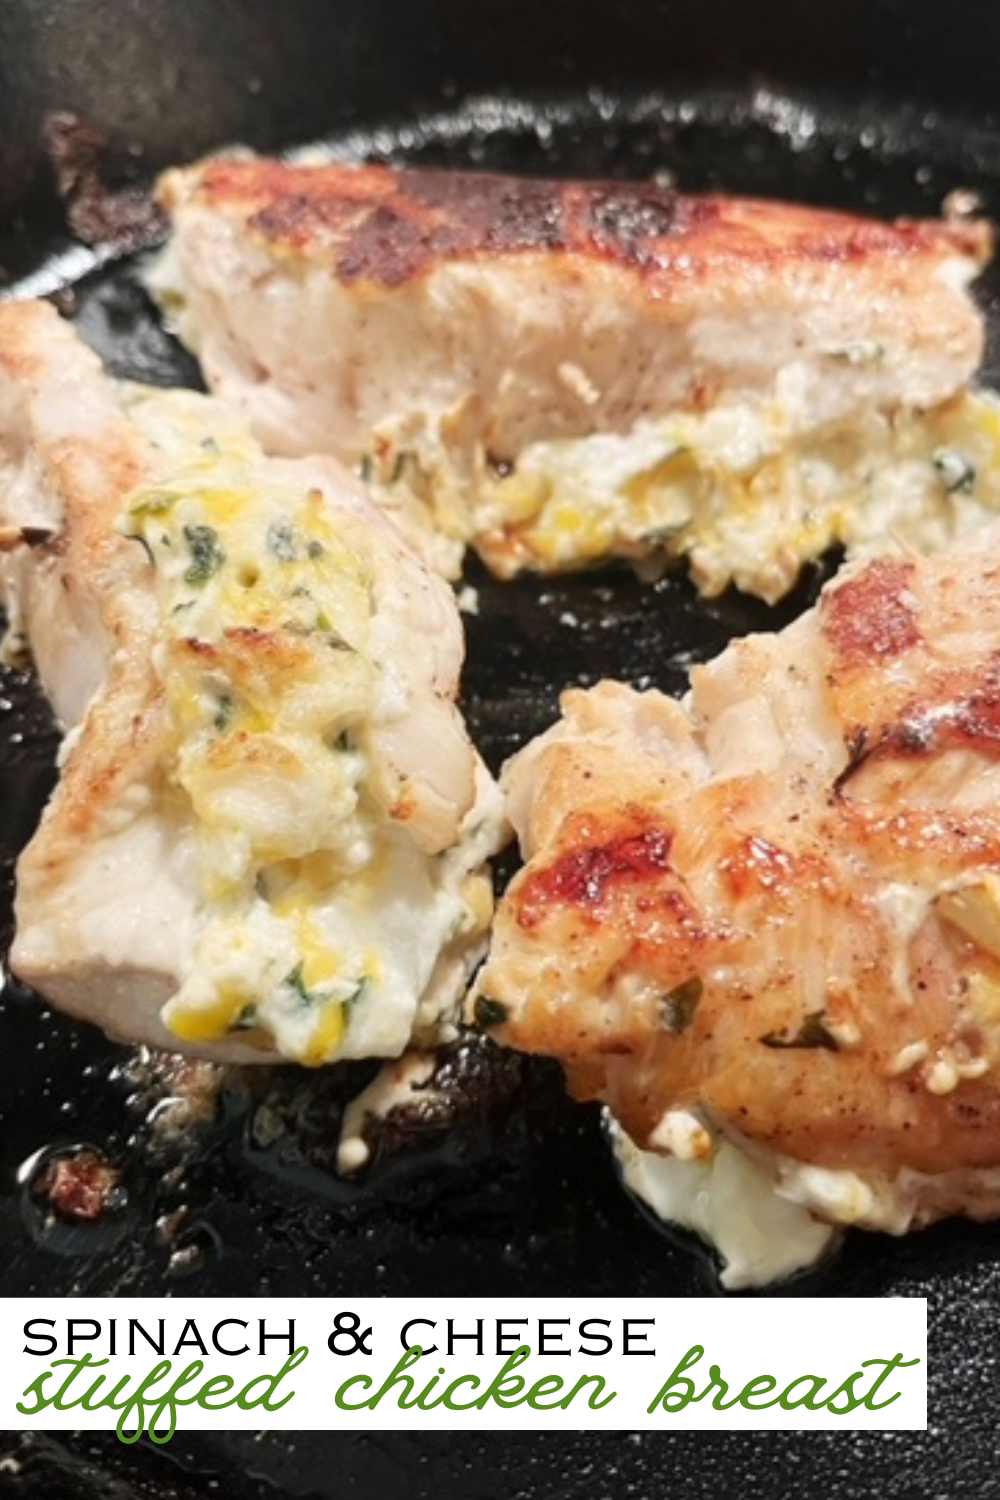 Want a unique entree that will be popular with the whole family? Try this savory spinach and cheese stuffed chicken breast recipe!